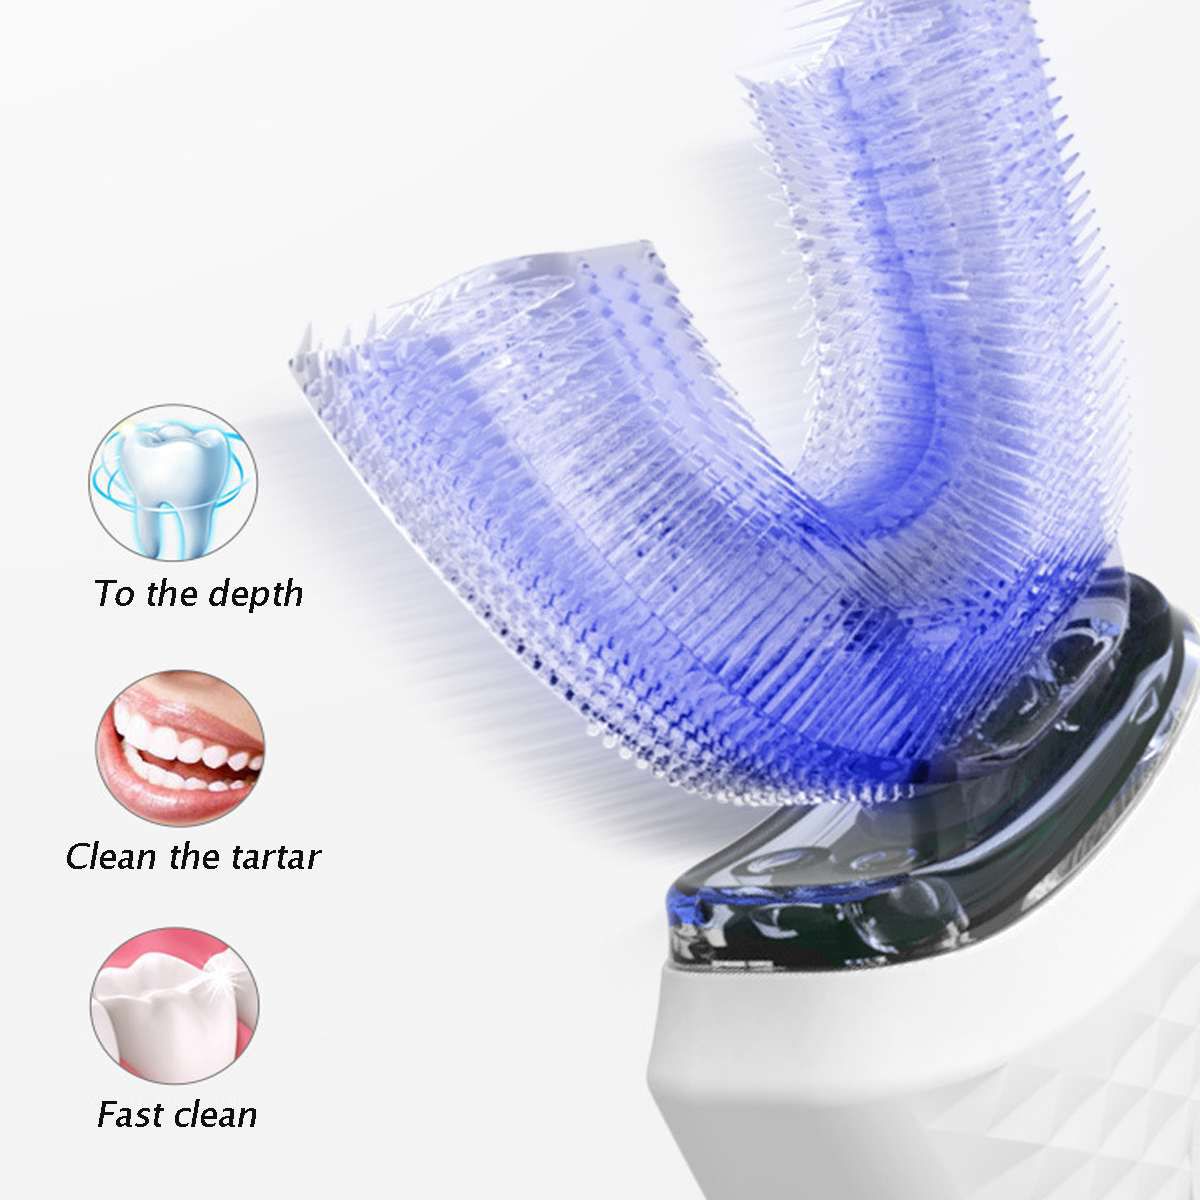 360 Degrees Intelligent Automatic Sonic Electric Toothbrush Waterproof USB Rechargeable Ultrasonic U Shape 3 Modes Timer